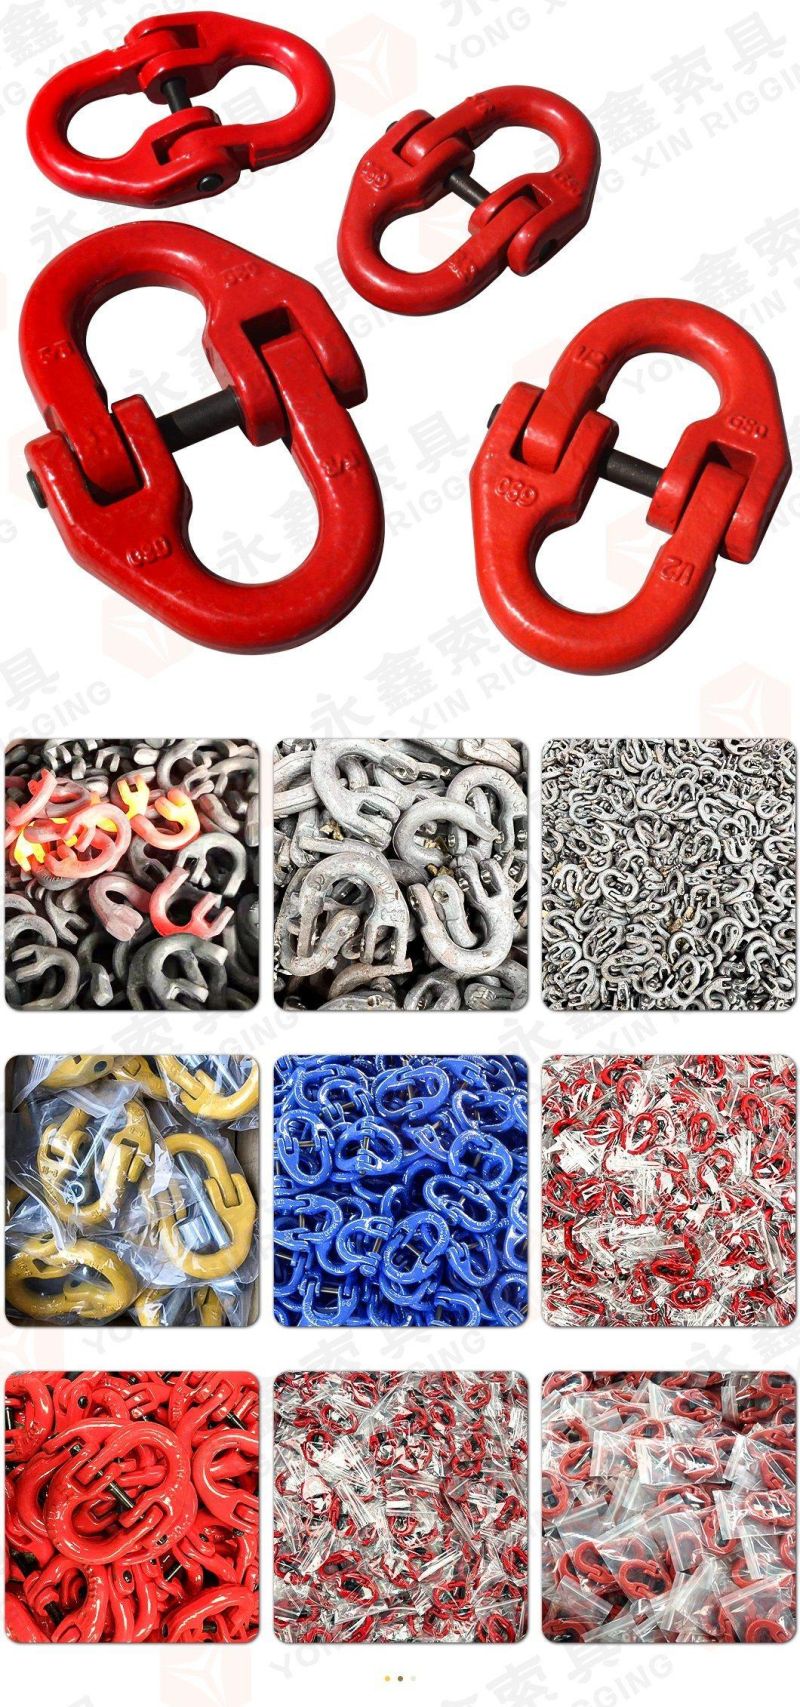 G80 Germanic Type Connecting Link Hammerlock Coupling Chain Connector Rigging Hardware